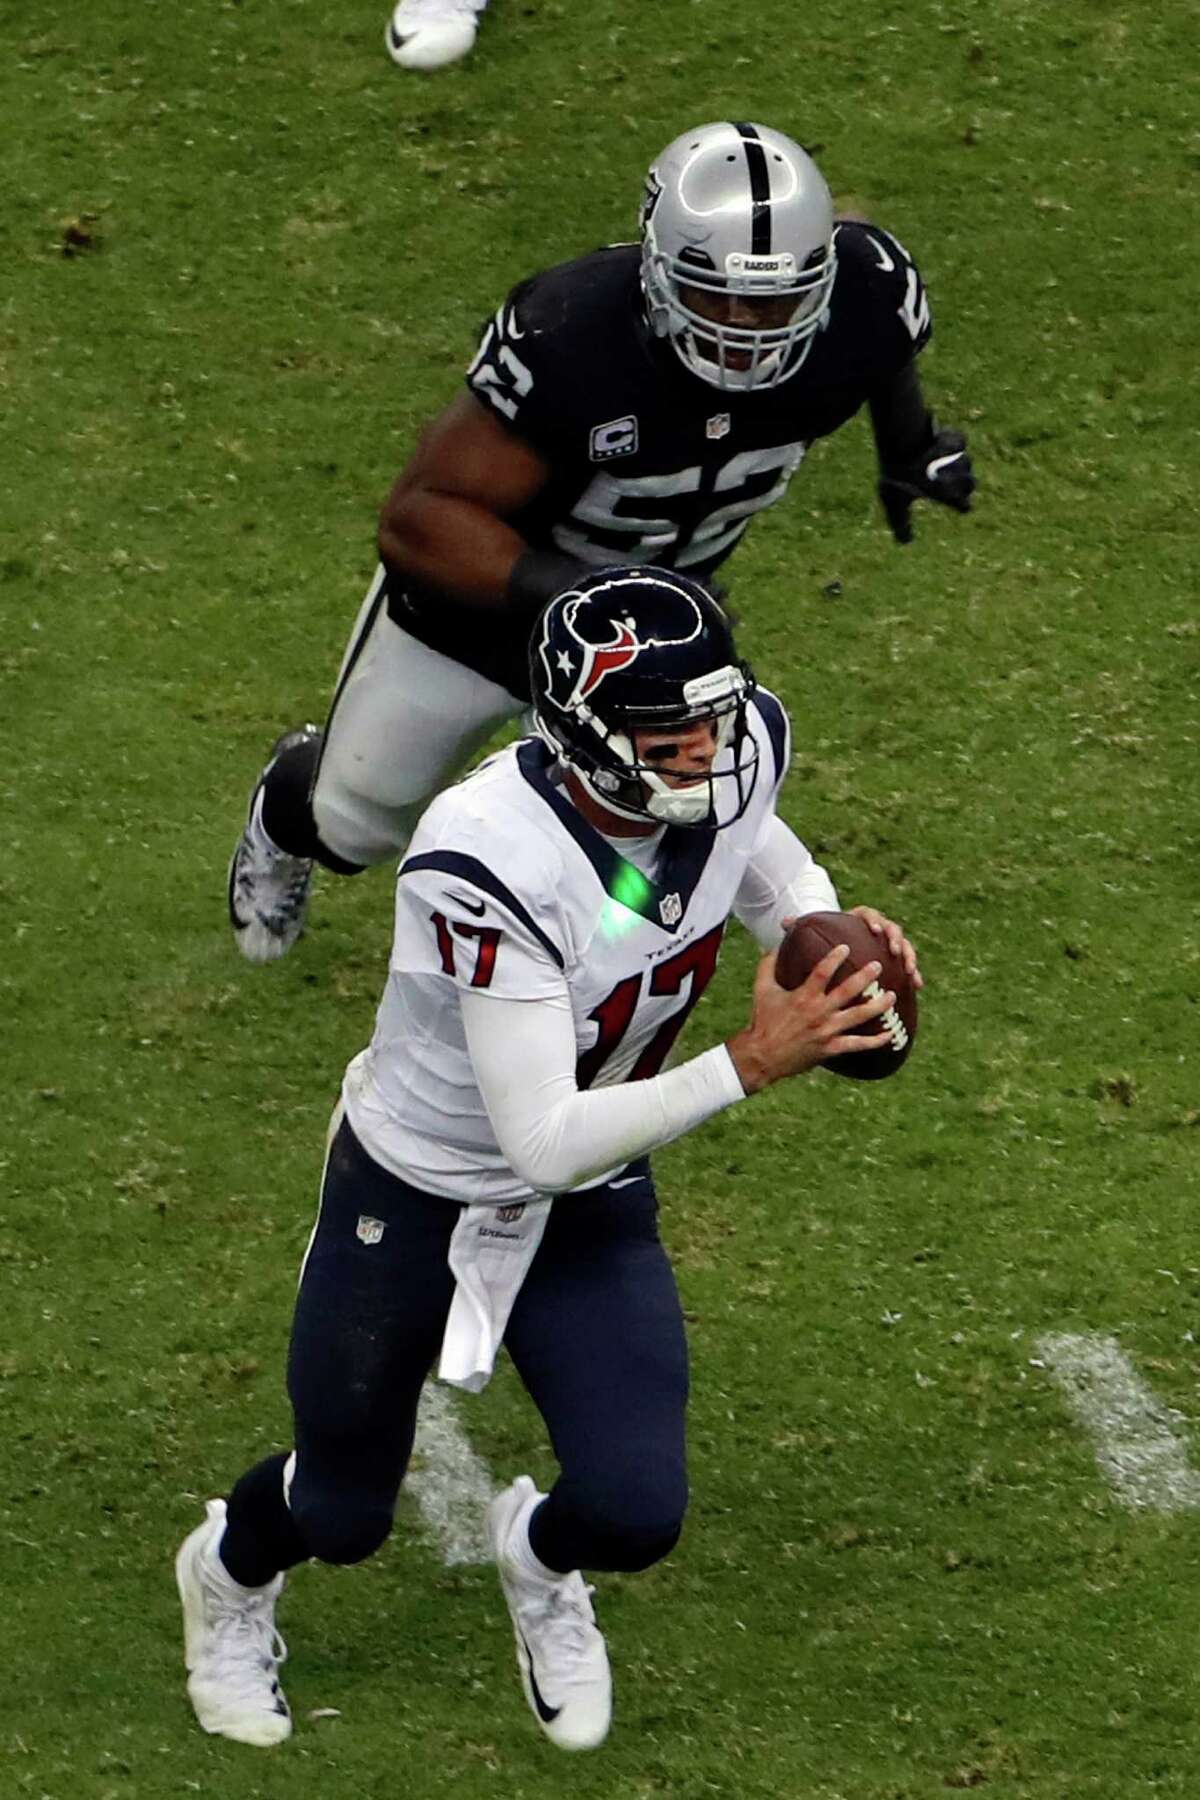 A green laser hits the jersey of Houston Texans quarterback Brock Osweiler as he runs during the second half of an NFL football game against the Oakland Raiders Monday, Nov. 21, 2016, in Mexico City. (AP Photo/Dario Lopez-Mills)